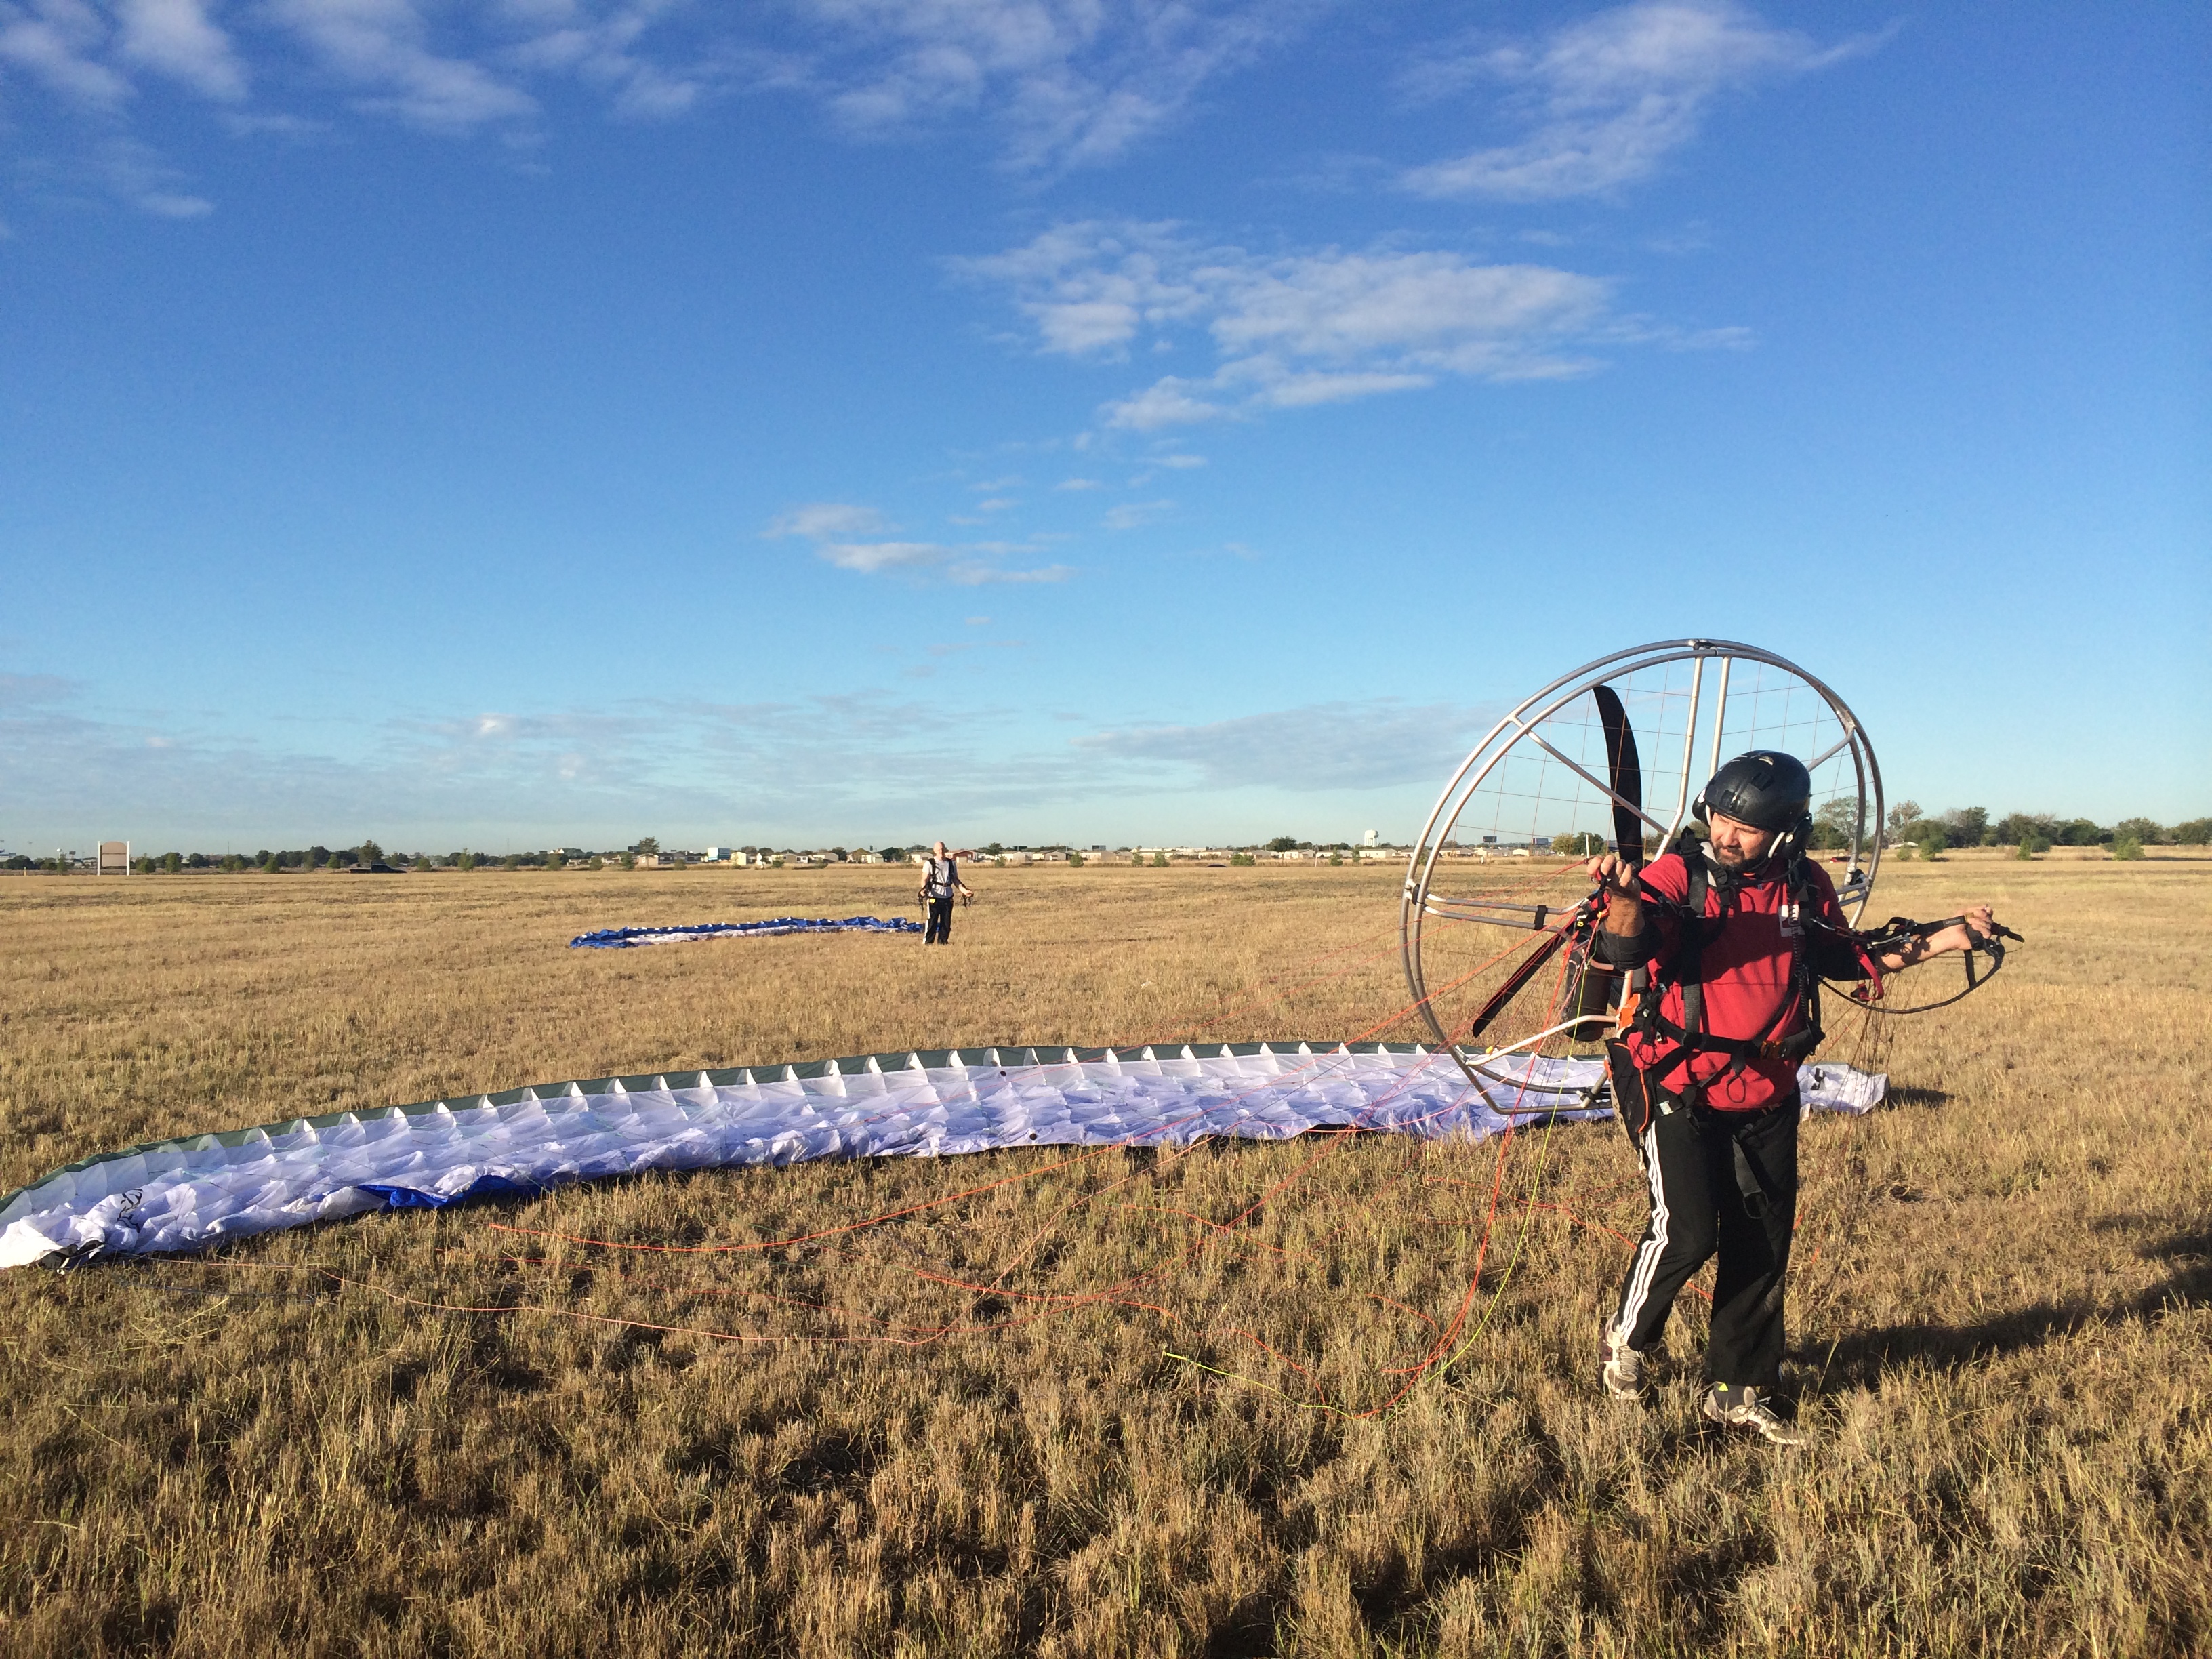 ppg paramotor lessons